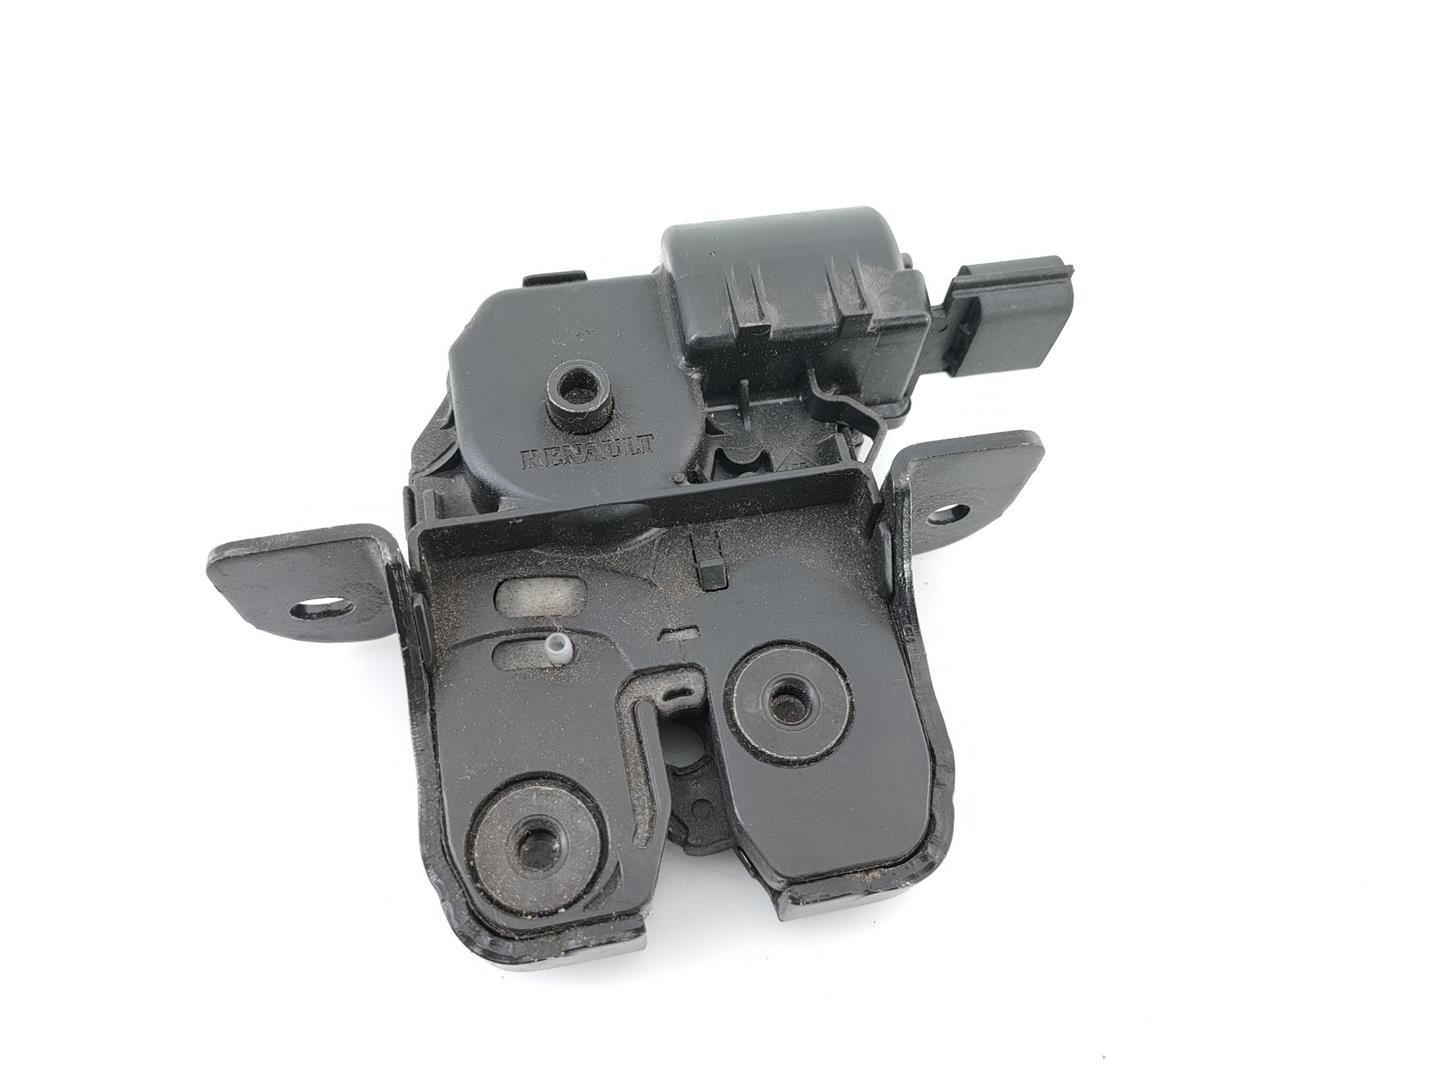 RENAULT Megane 3 generation (2008-2020) Tailgate Boot Lock 846300003R, E1-A1-44-1 20953789